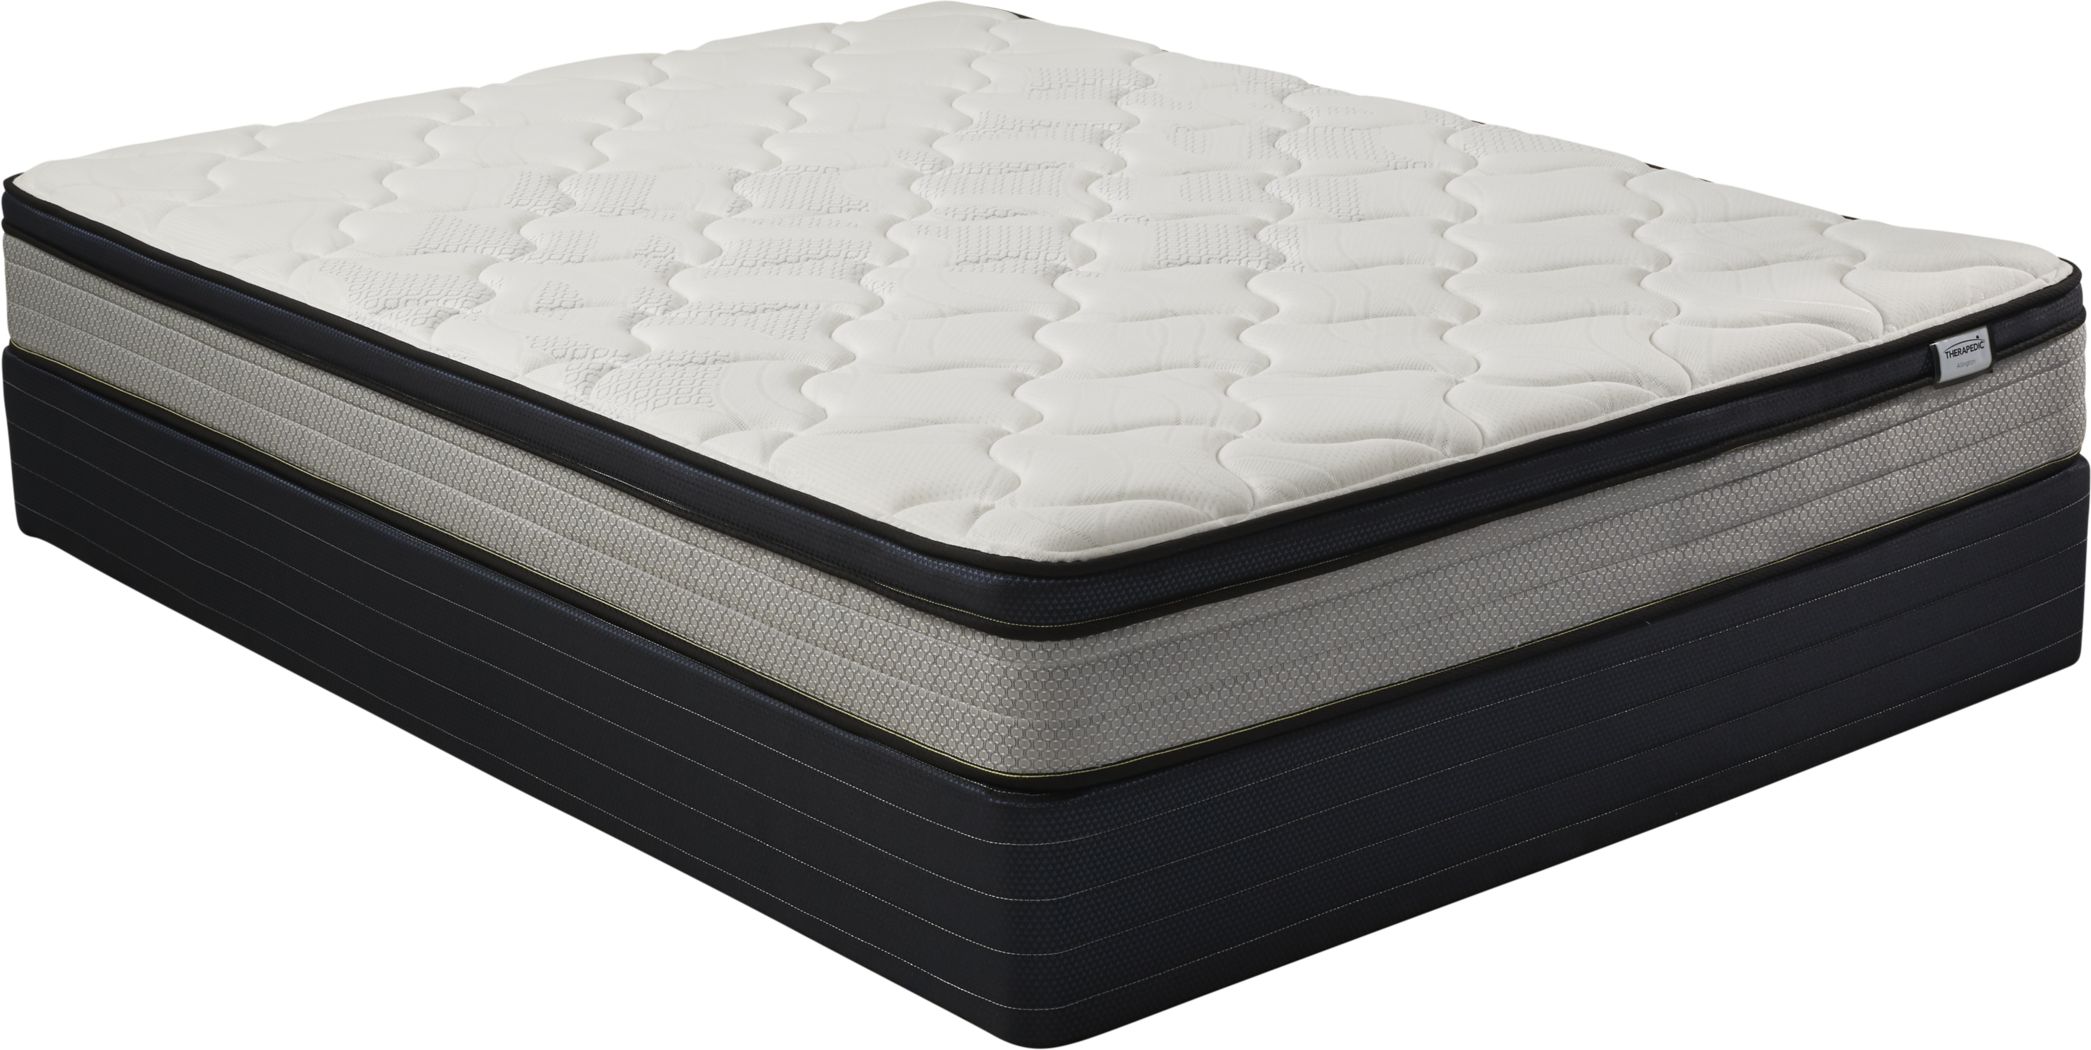 Discount Mattresses - Rooms To Go Outlet